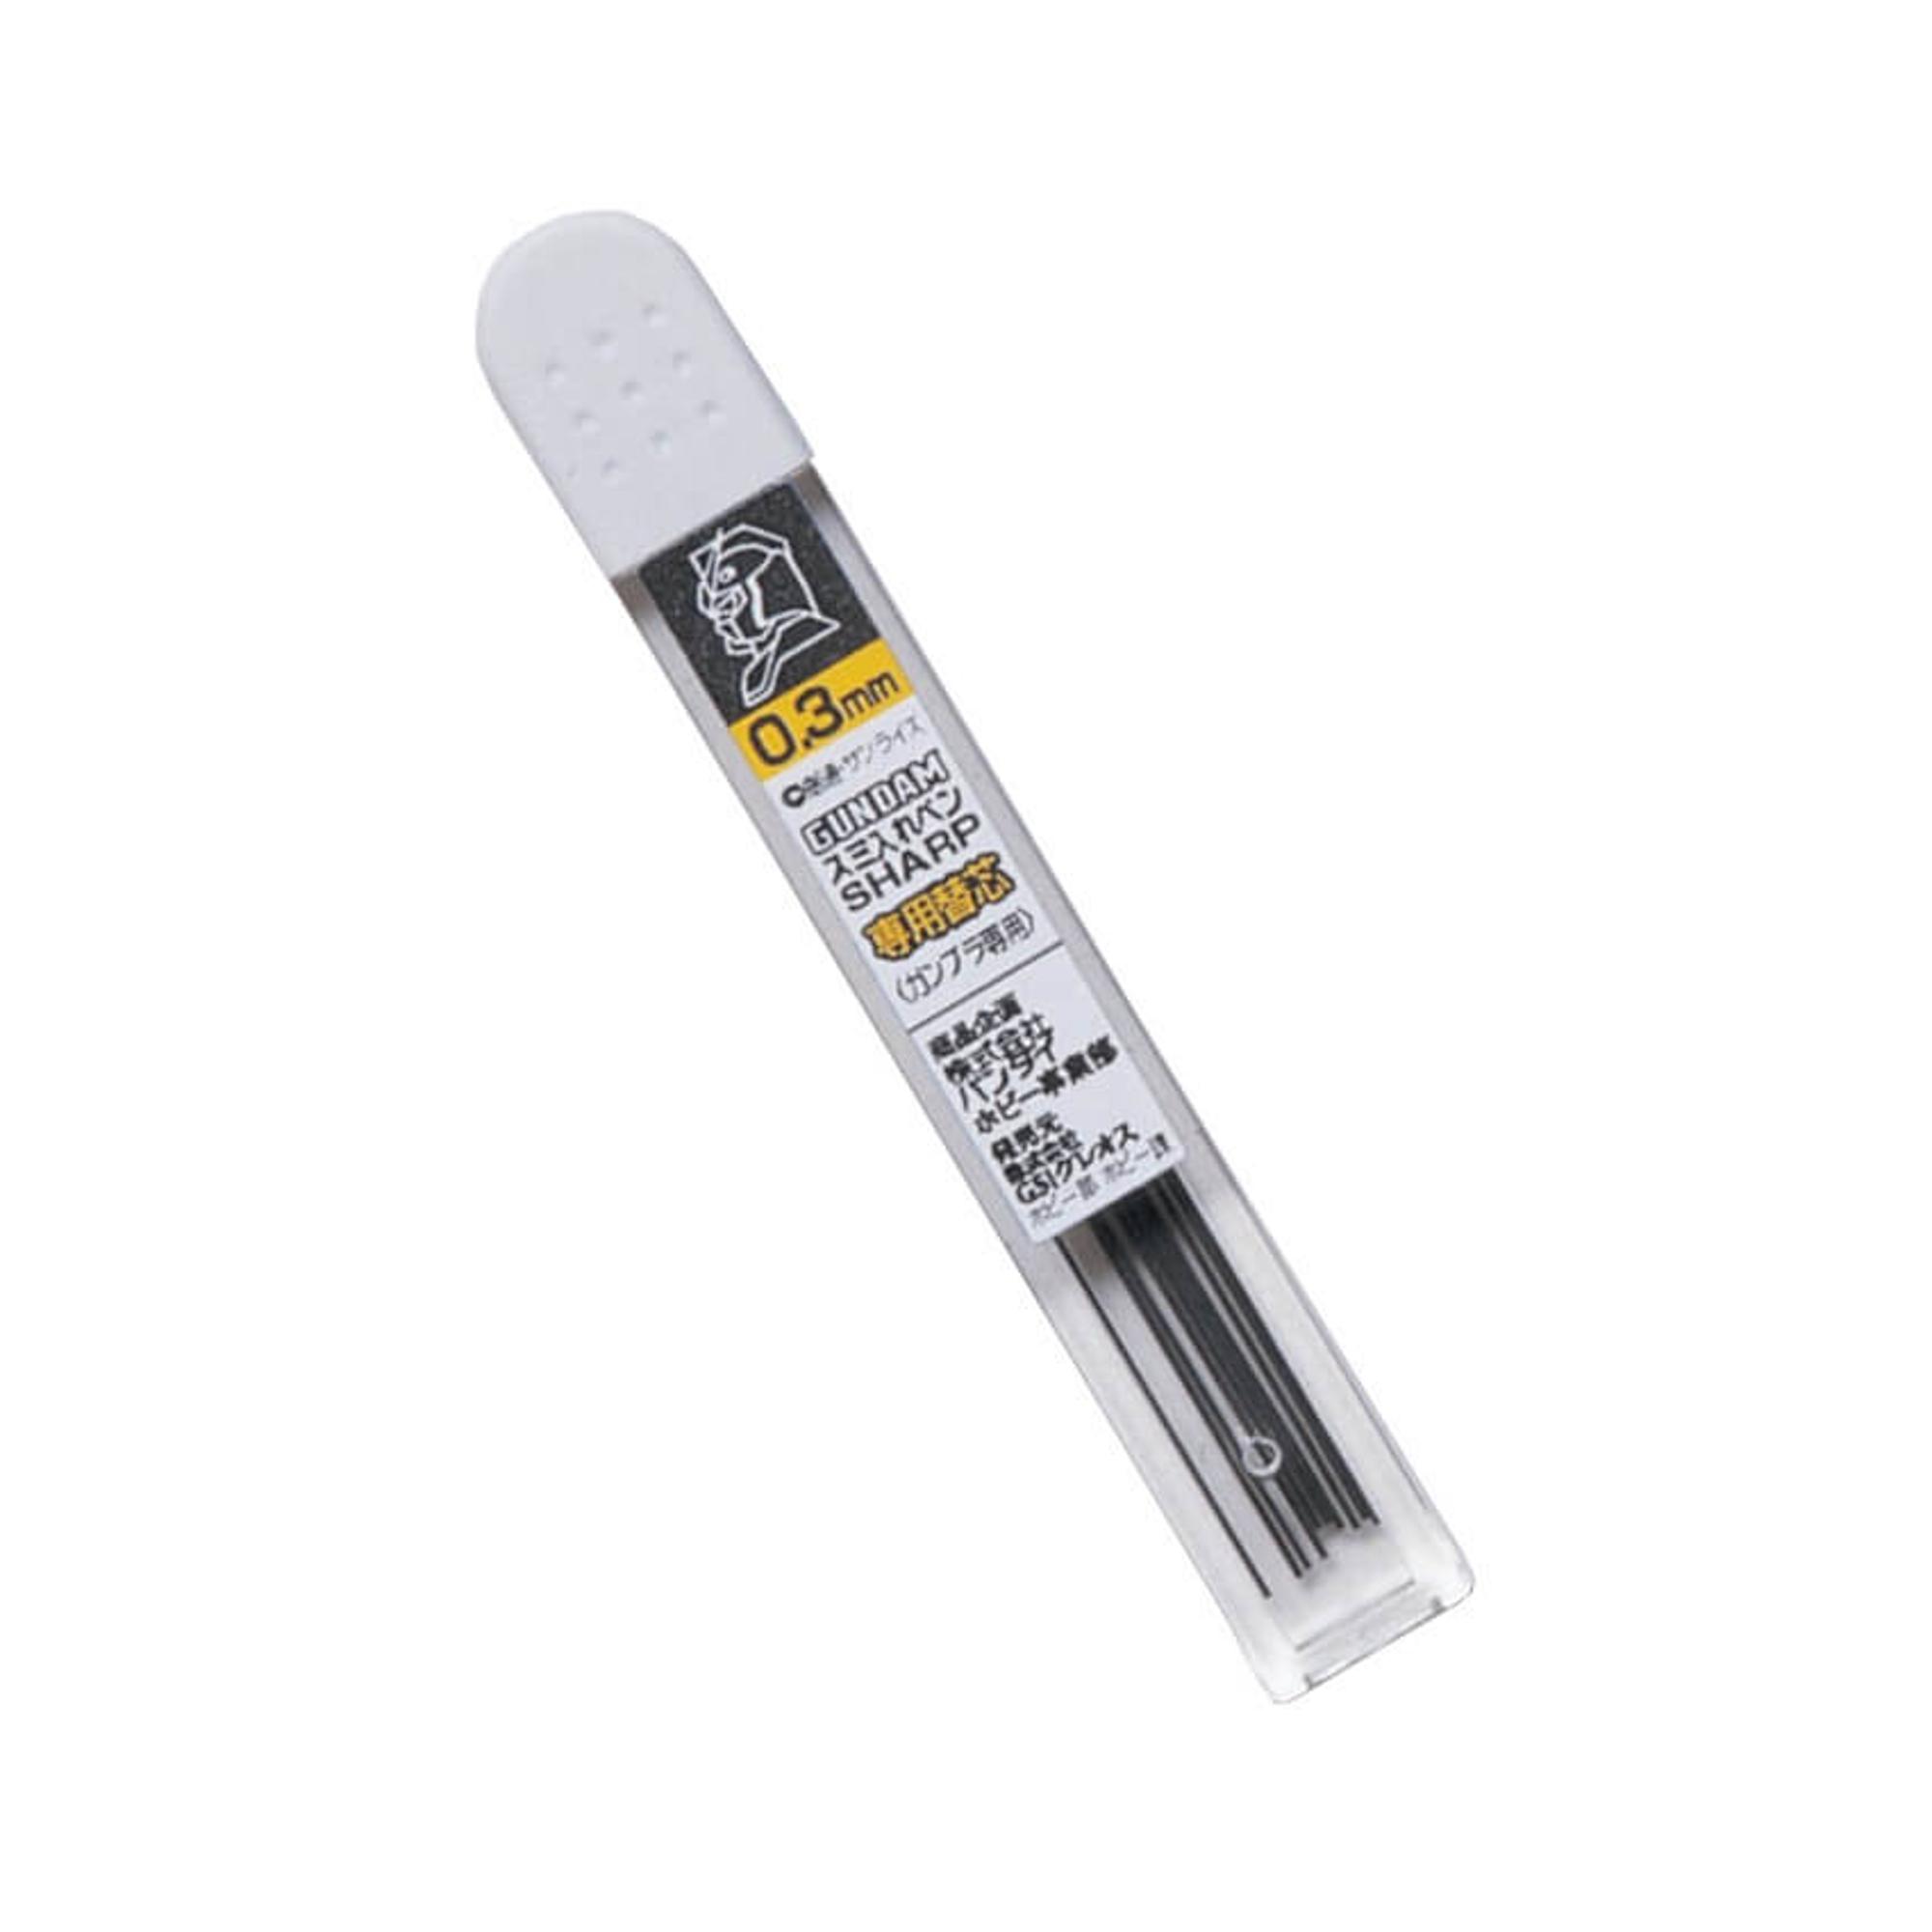 Replacement Lead for Gundam Mechanic Pencil (0.3mm)